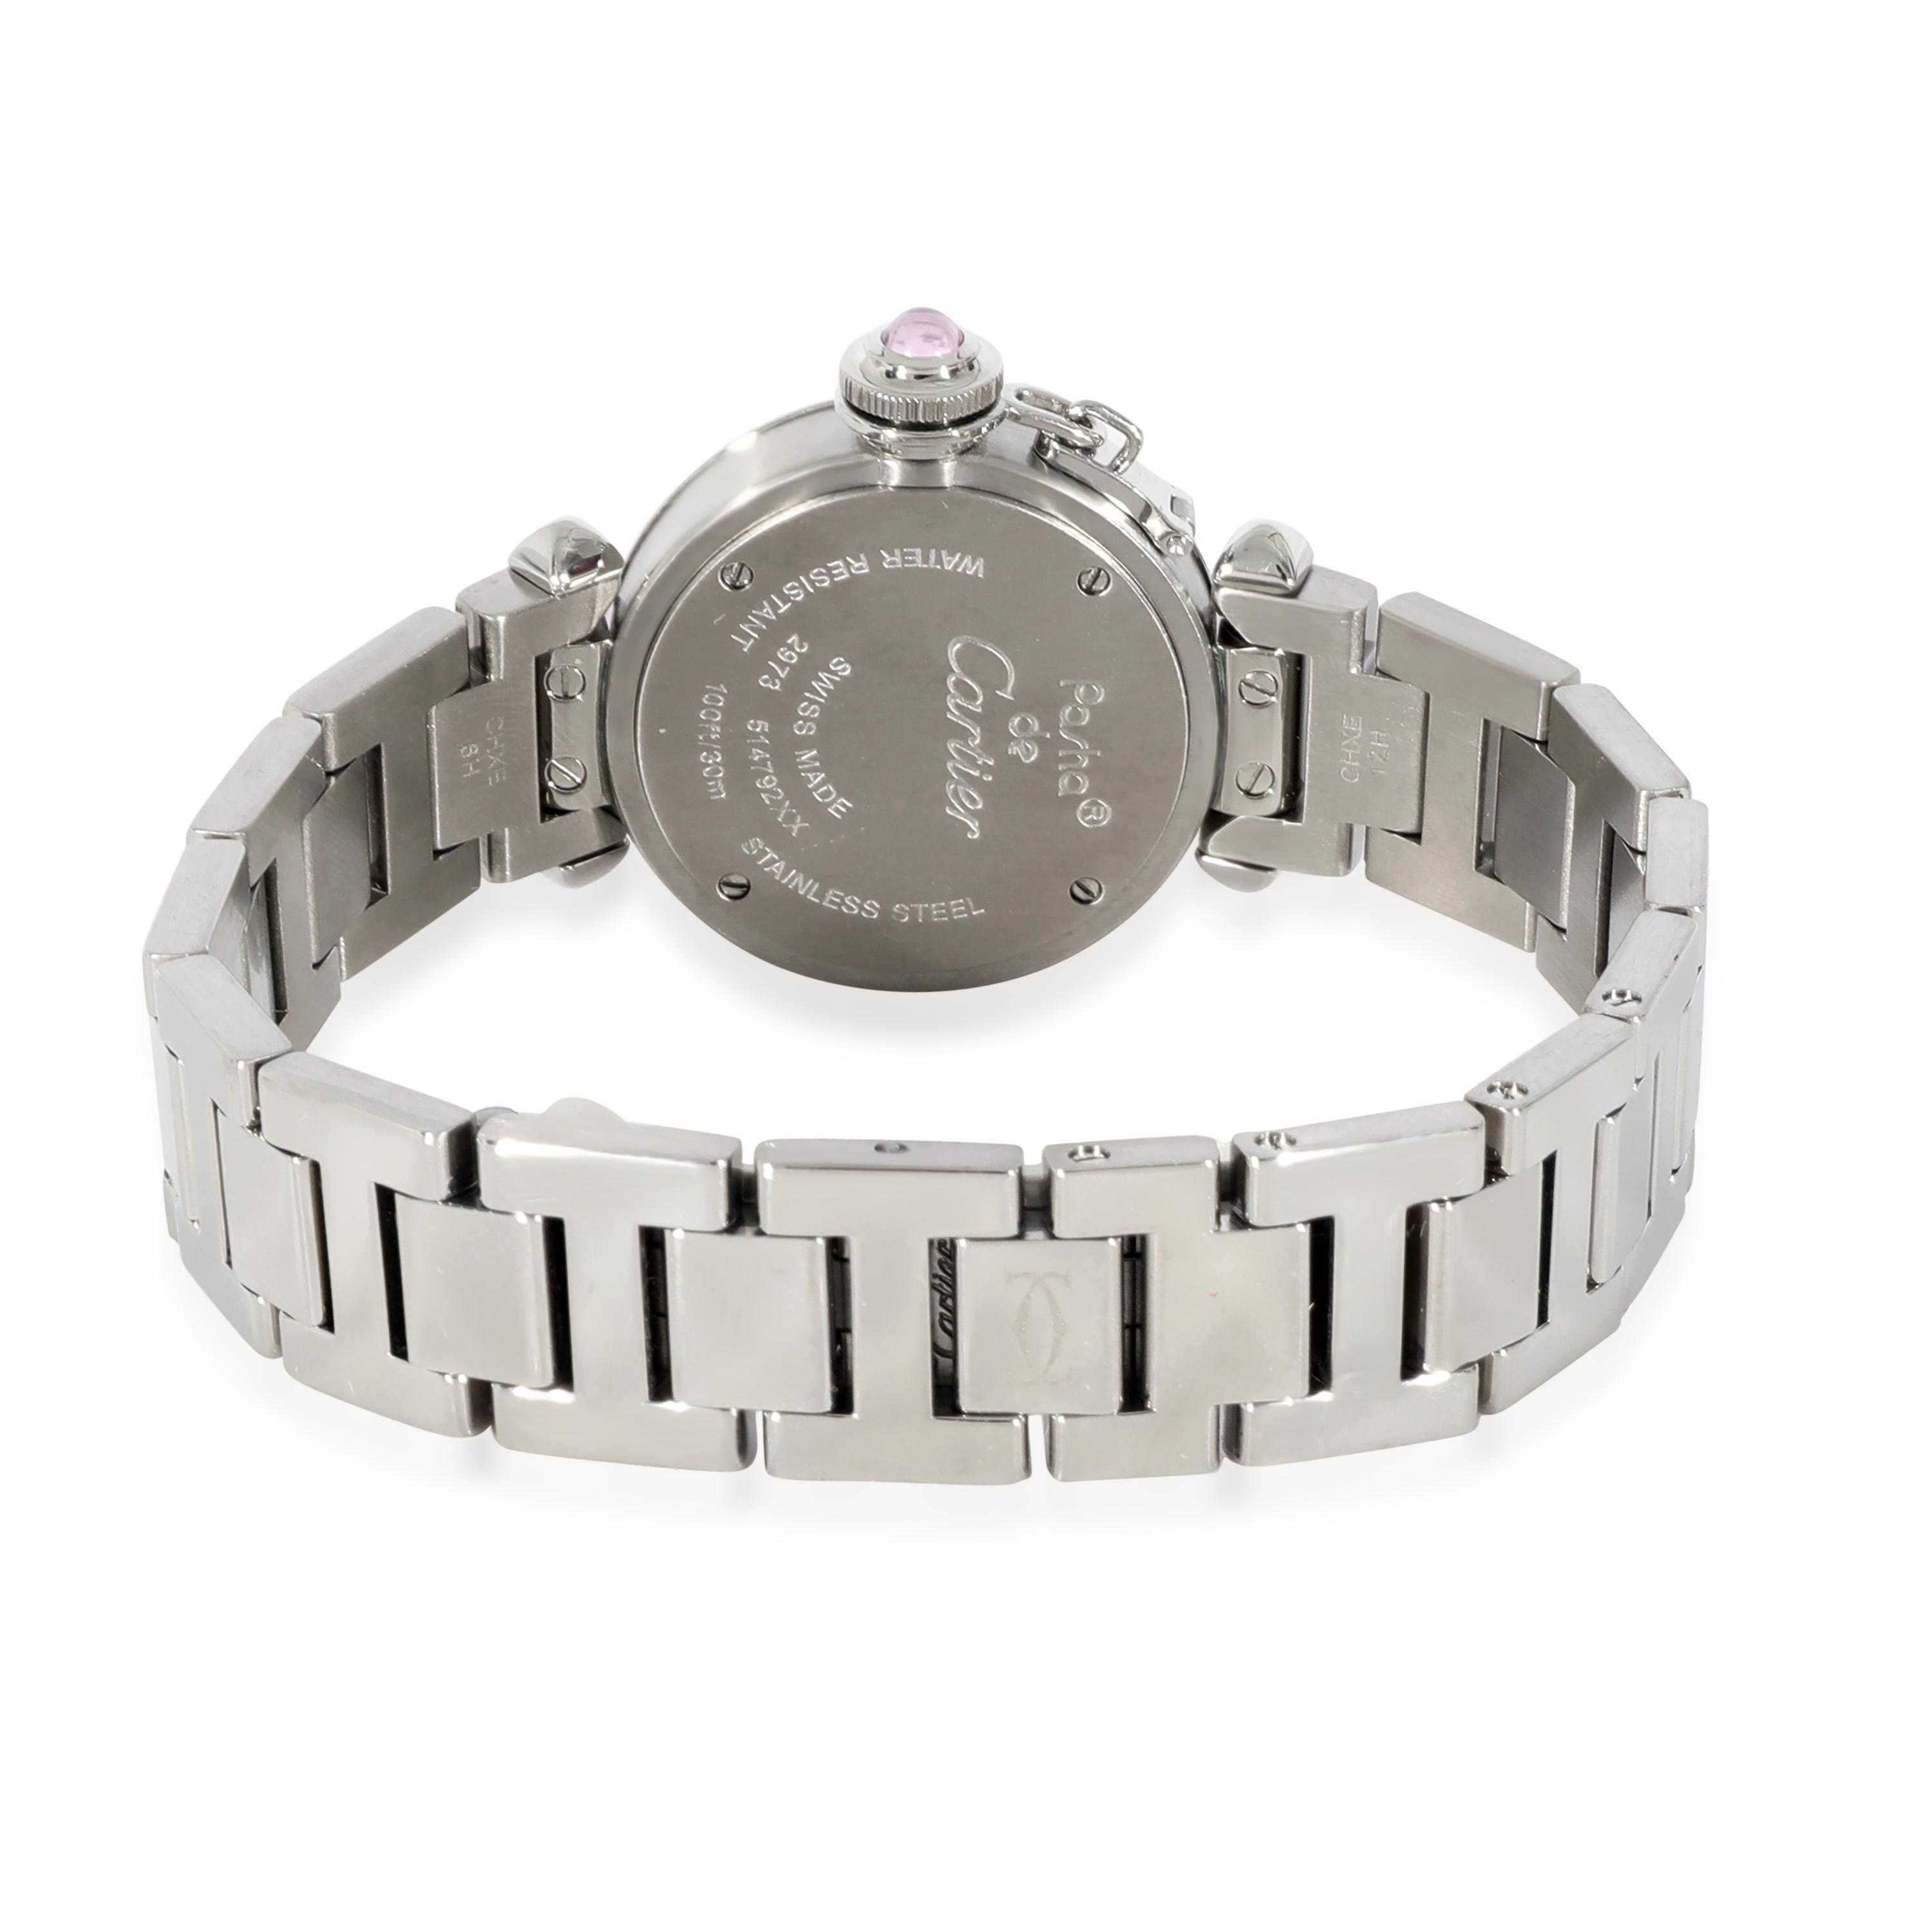 Cartier Miss Pasha W3140008 Women's Watch in  Stainless Steel

SKU: 128914

PRIMARY DETAILS
Brand: Cartier
Model: Miss Pasha
Country of Origin: Switzerland
Movement Type: Quartz: Battery
Year of Manufacture: 2010-2019
Condition: Retail price 3600